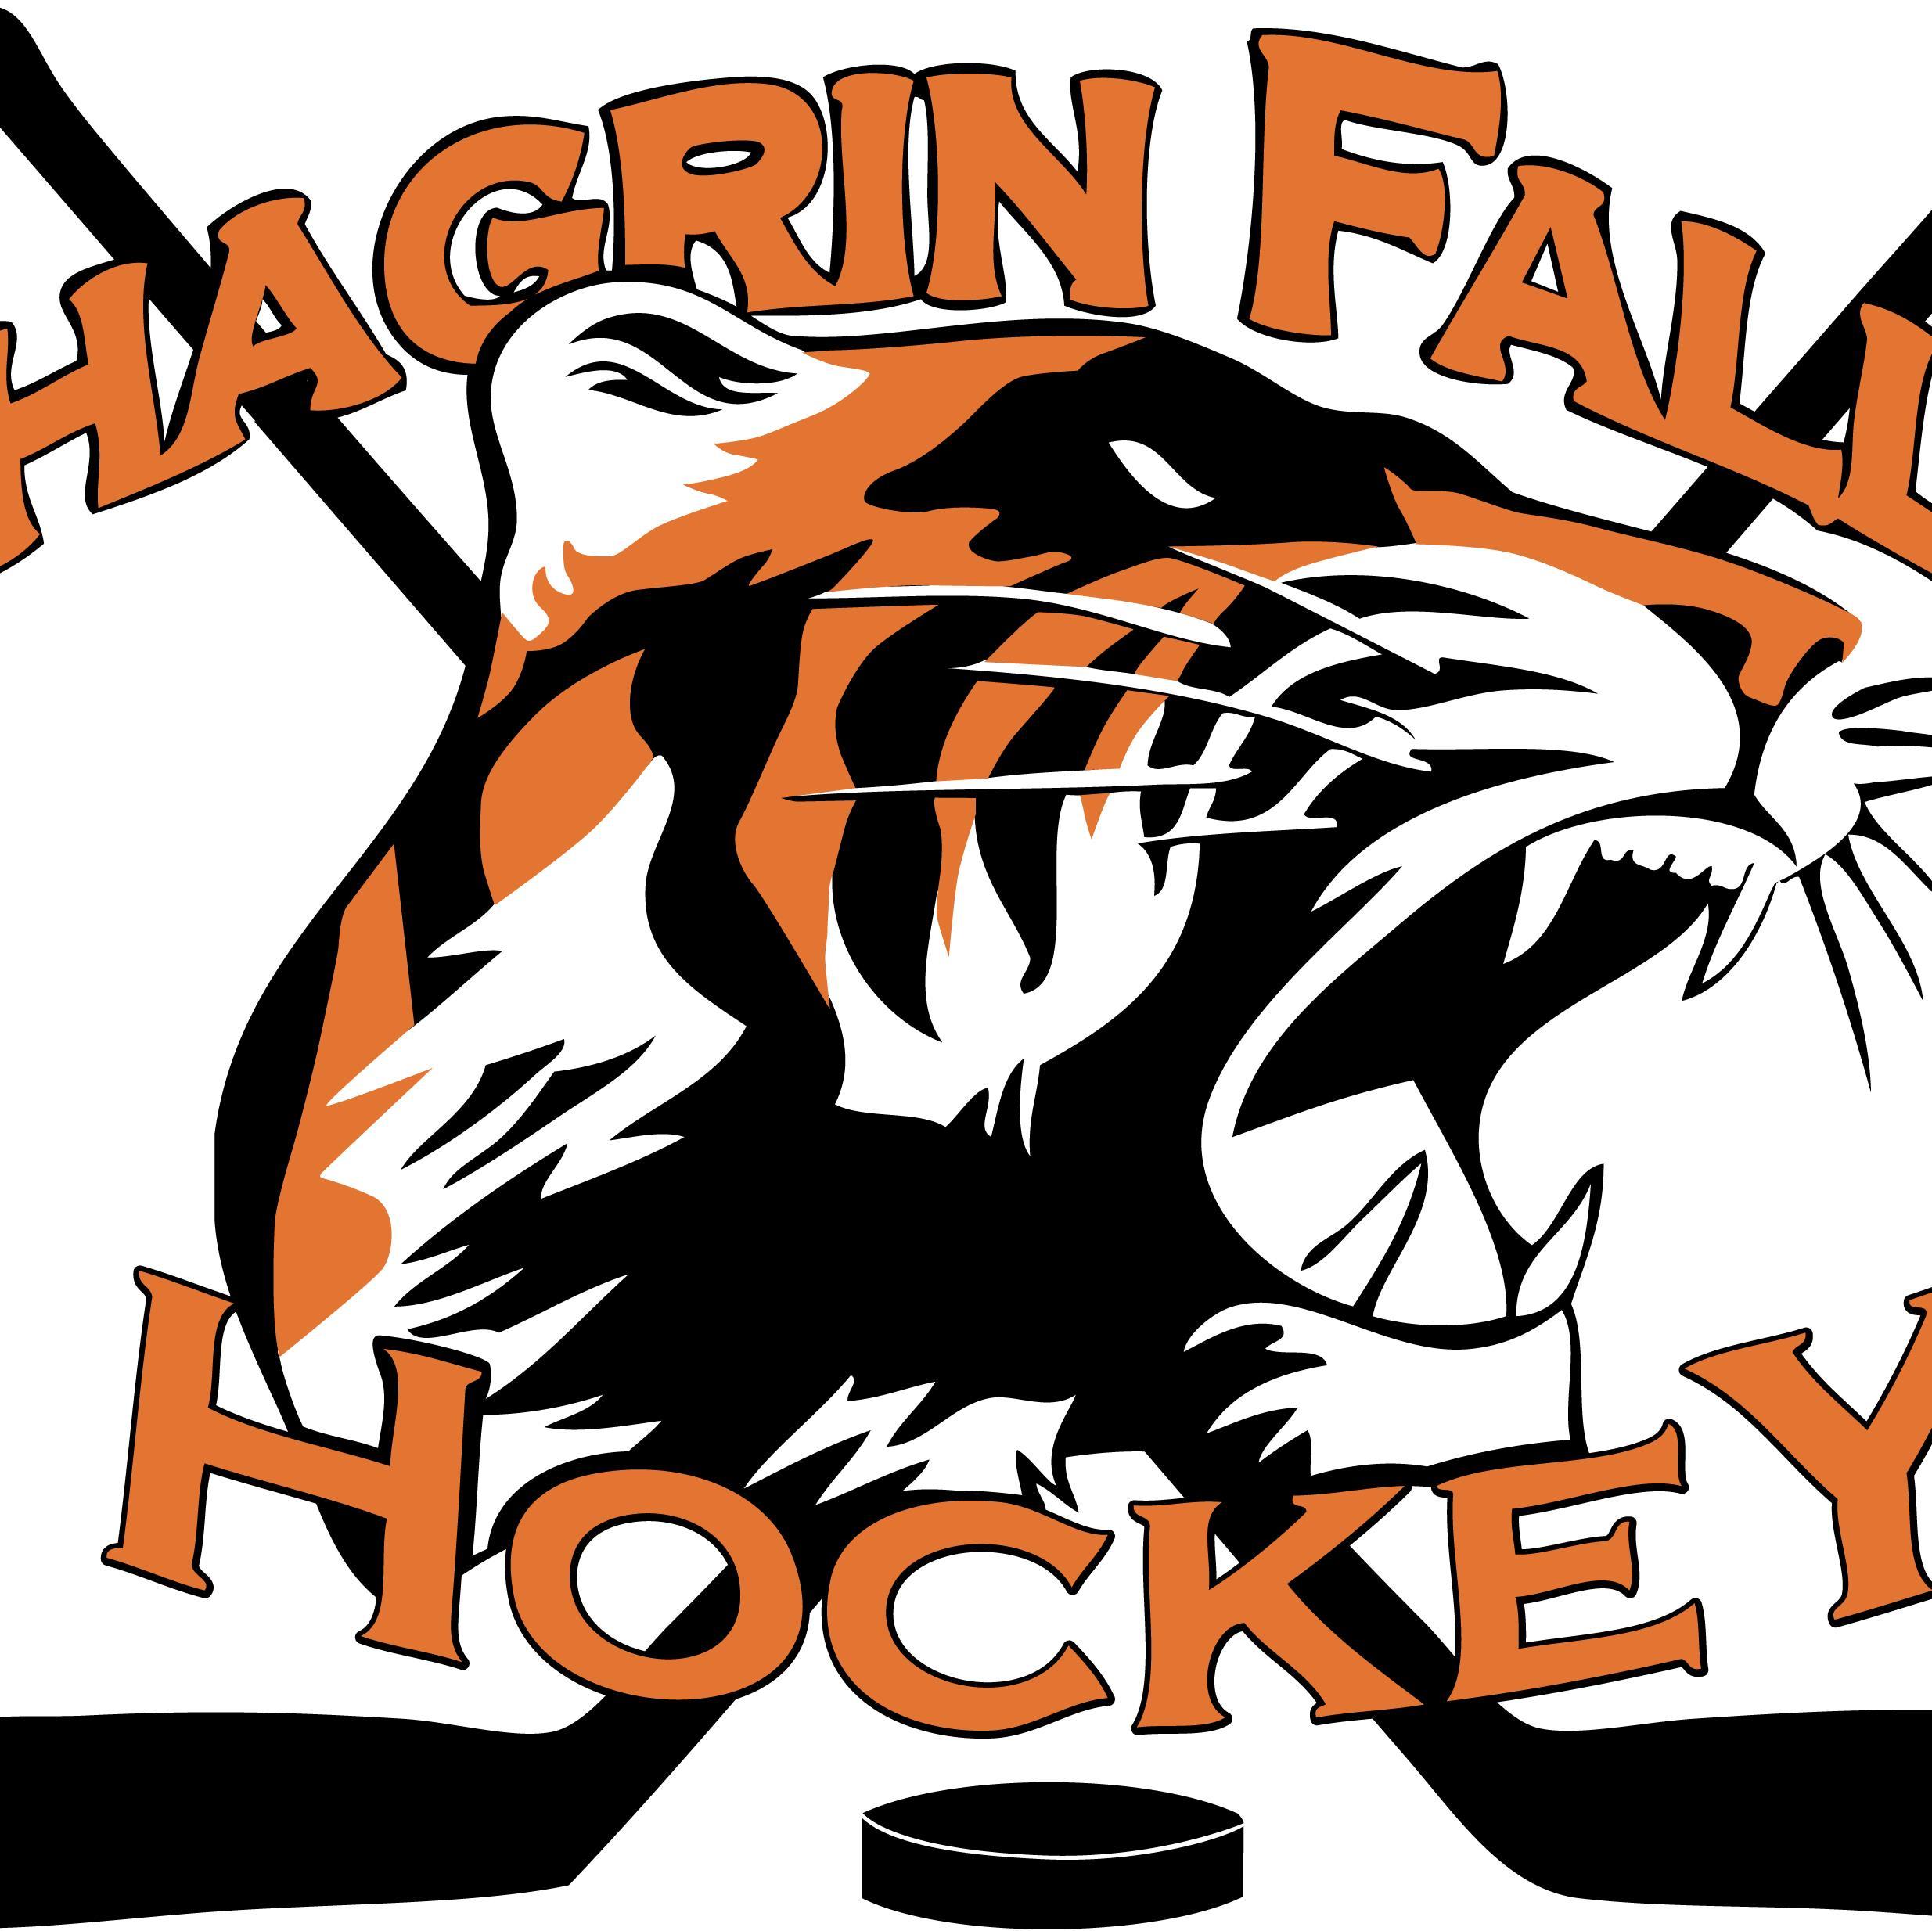 official Twitter page of the Chagrin Falls Hockey team